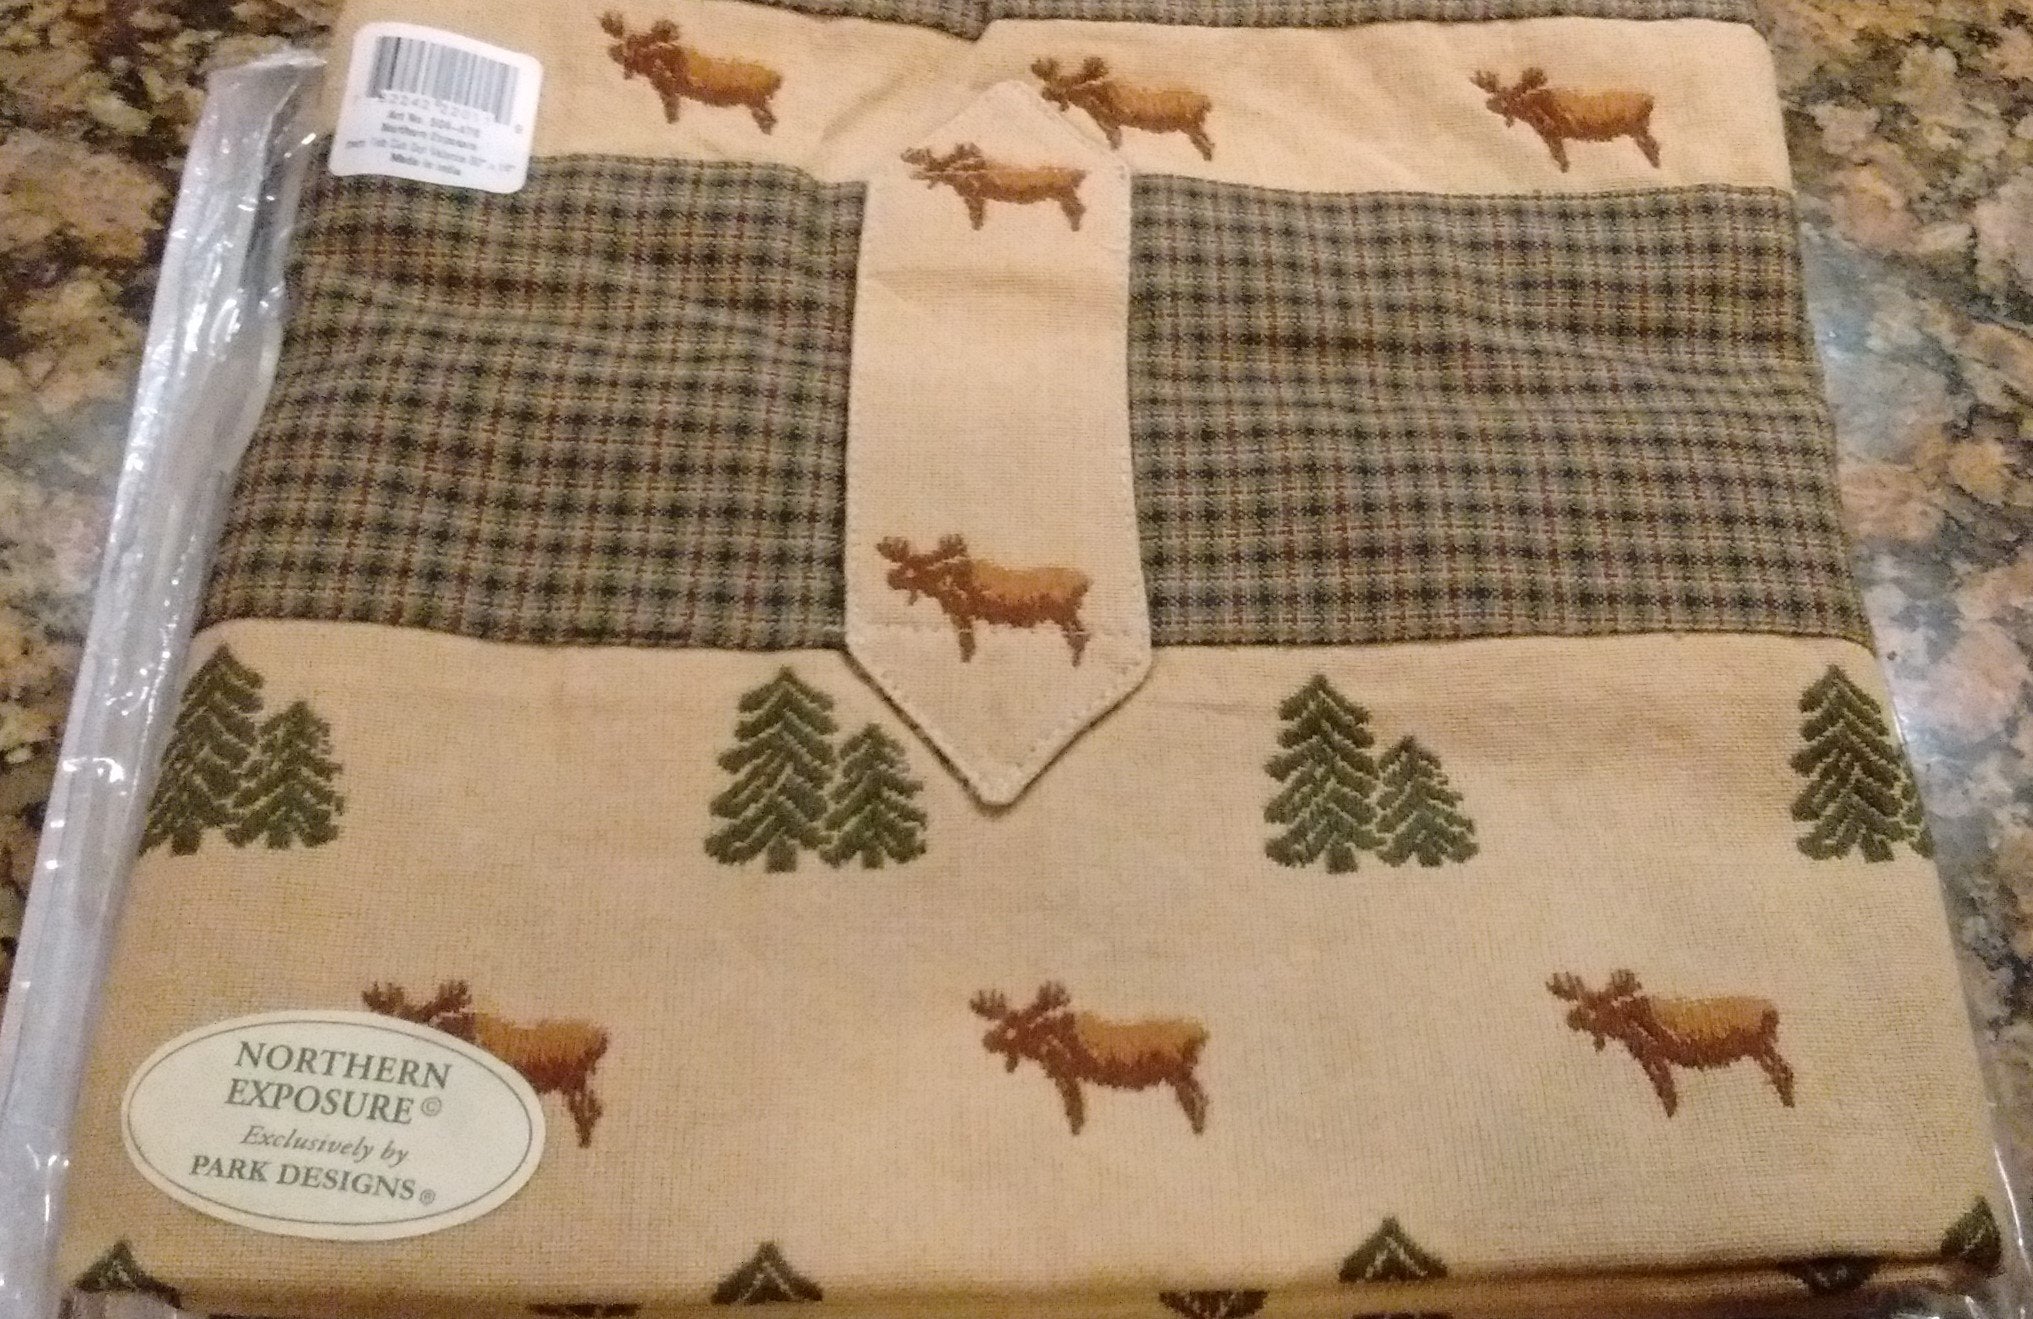 Park Designs - Northern Exposure Tab Cut Out Valance - Olde Church Emporium